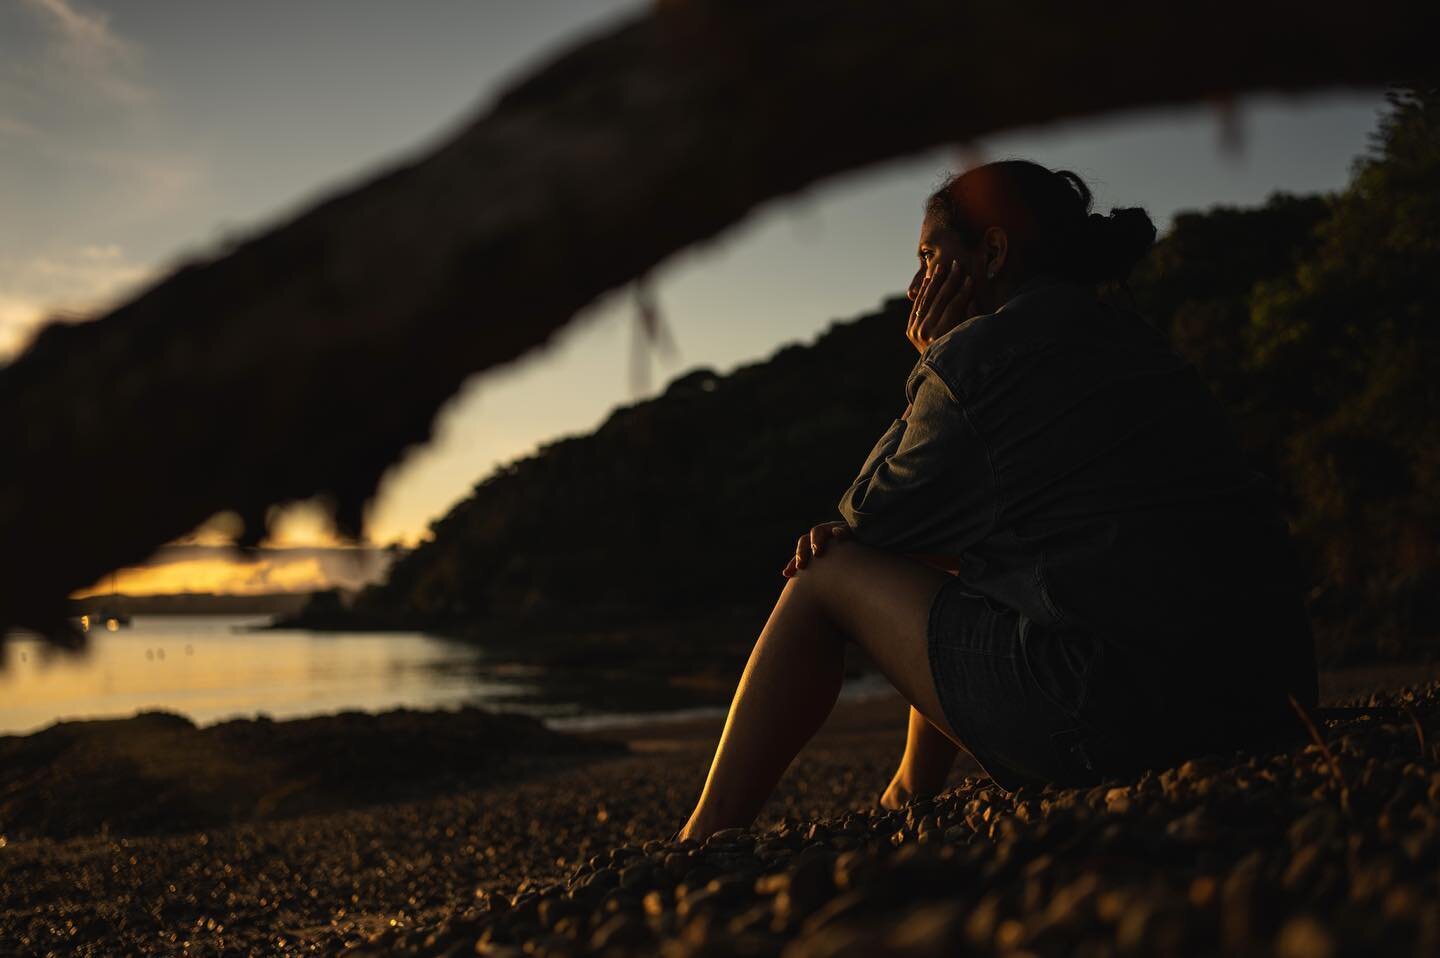 A pensive moment watching the sun set over Waitangi. Though we were only a 10 minute walk away from Russel, NZ's oldest European settlement, we had the beach entirely to ourselves. Definitely feeling some major gratitude that Aotearoa is our home.
.
